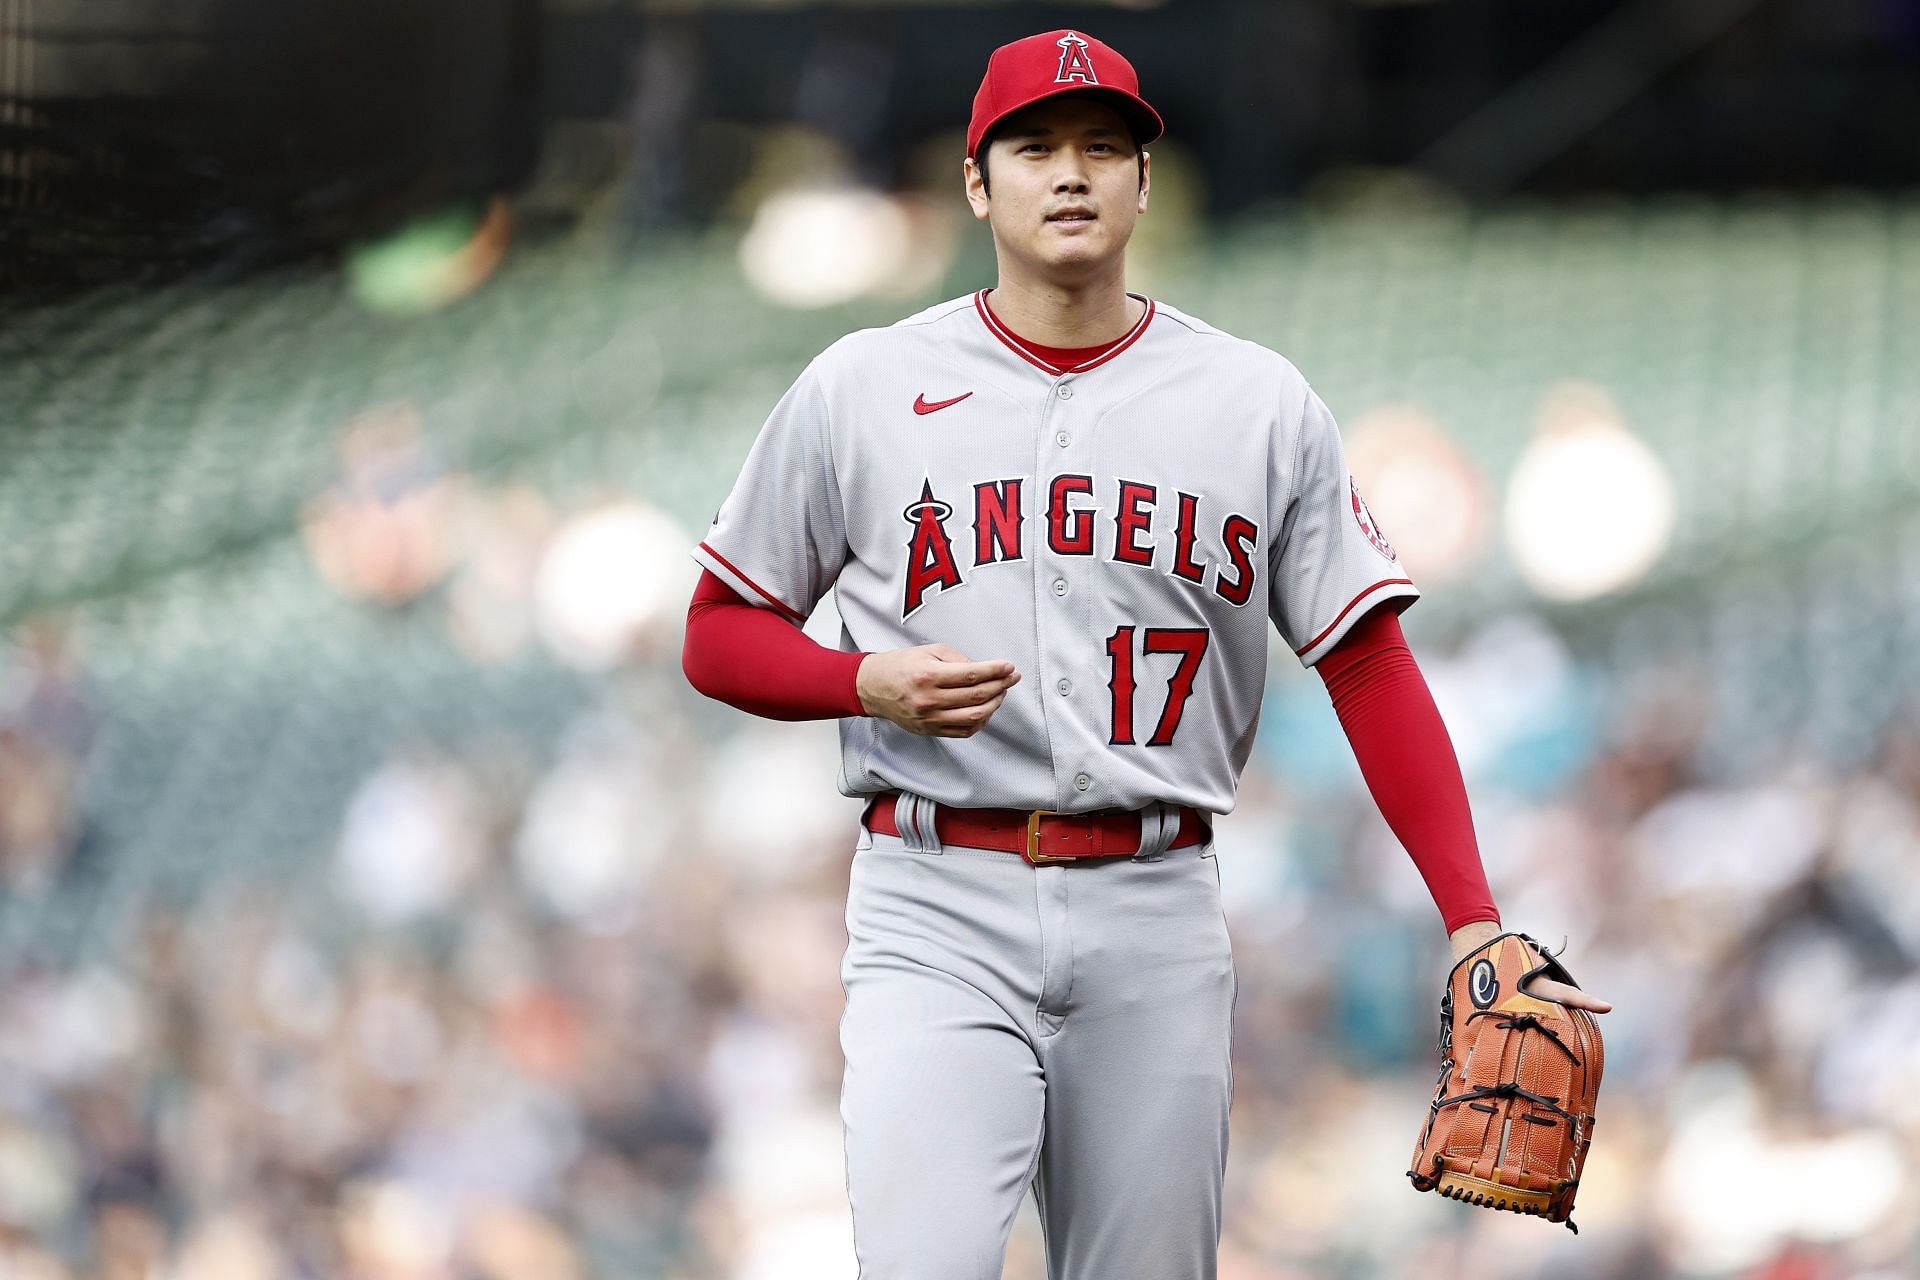 Los Angeles Angels pitcher and designated hitter Shohei Ohtani has been one of the few bright lights on the team recently.